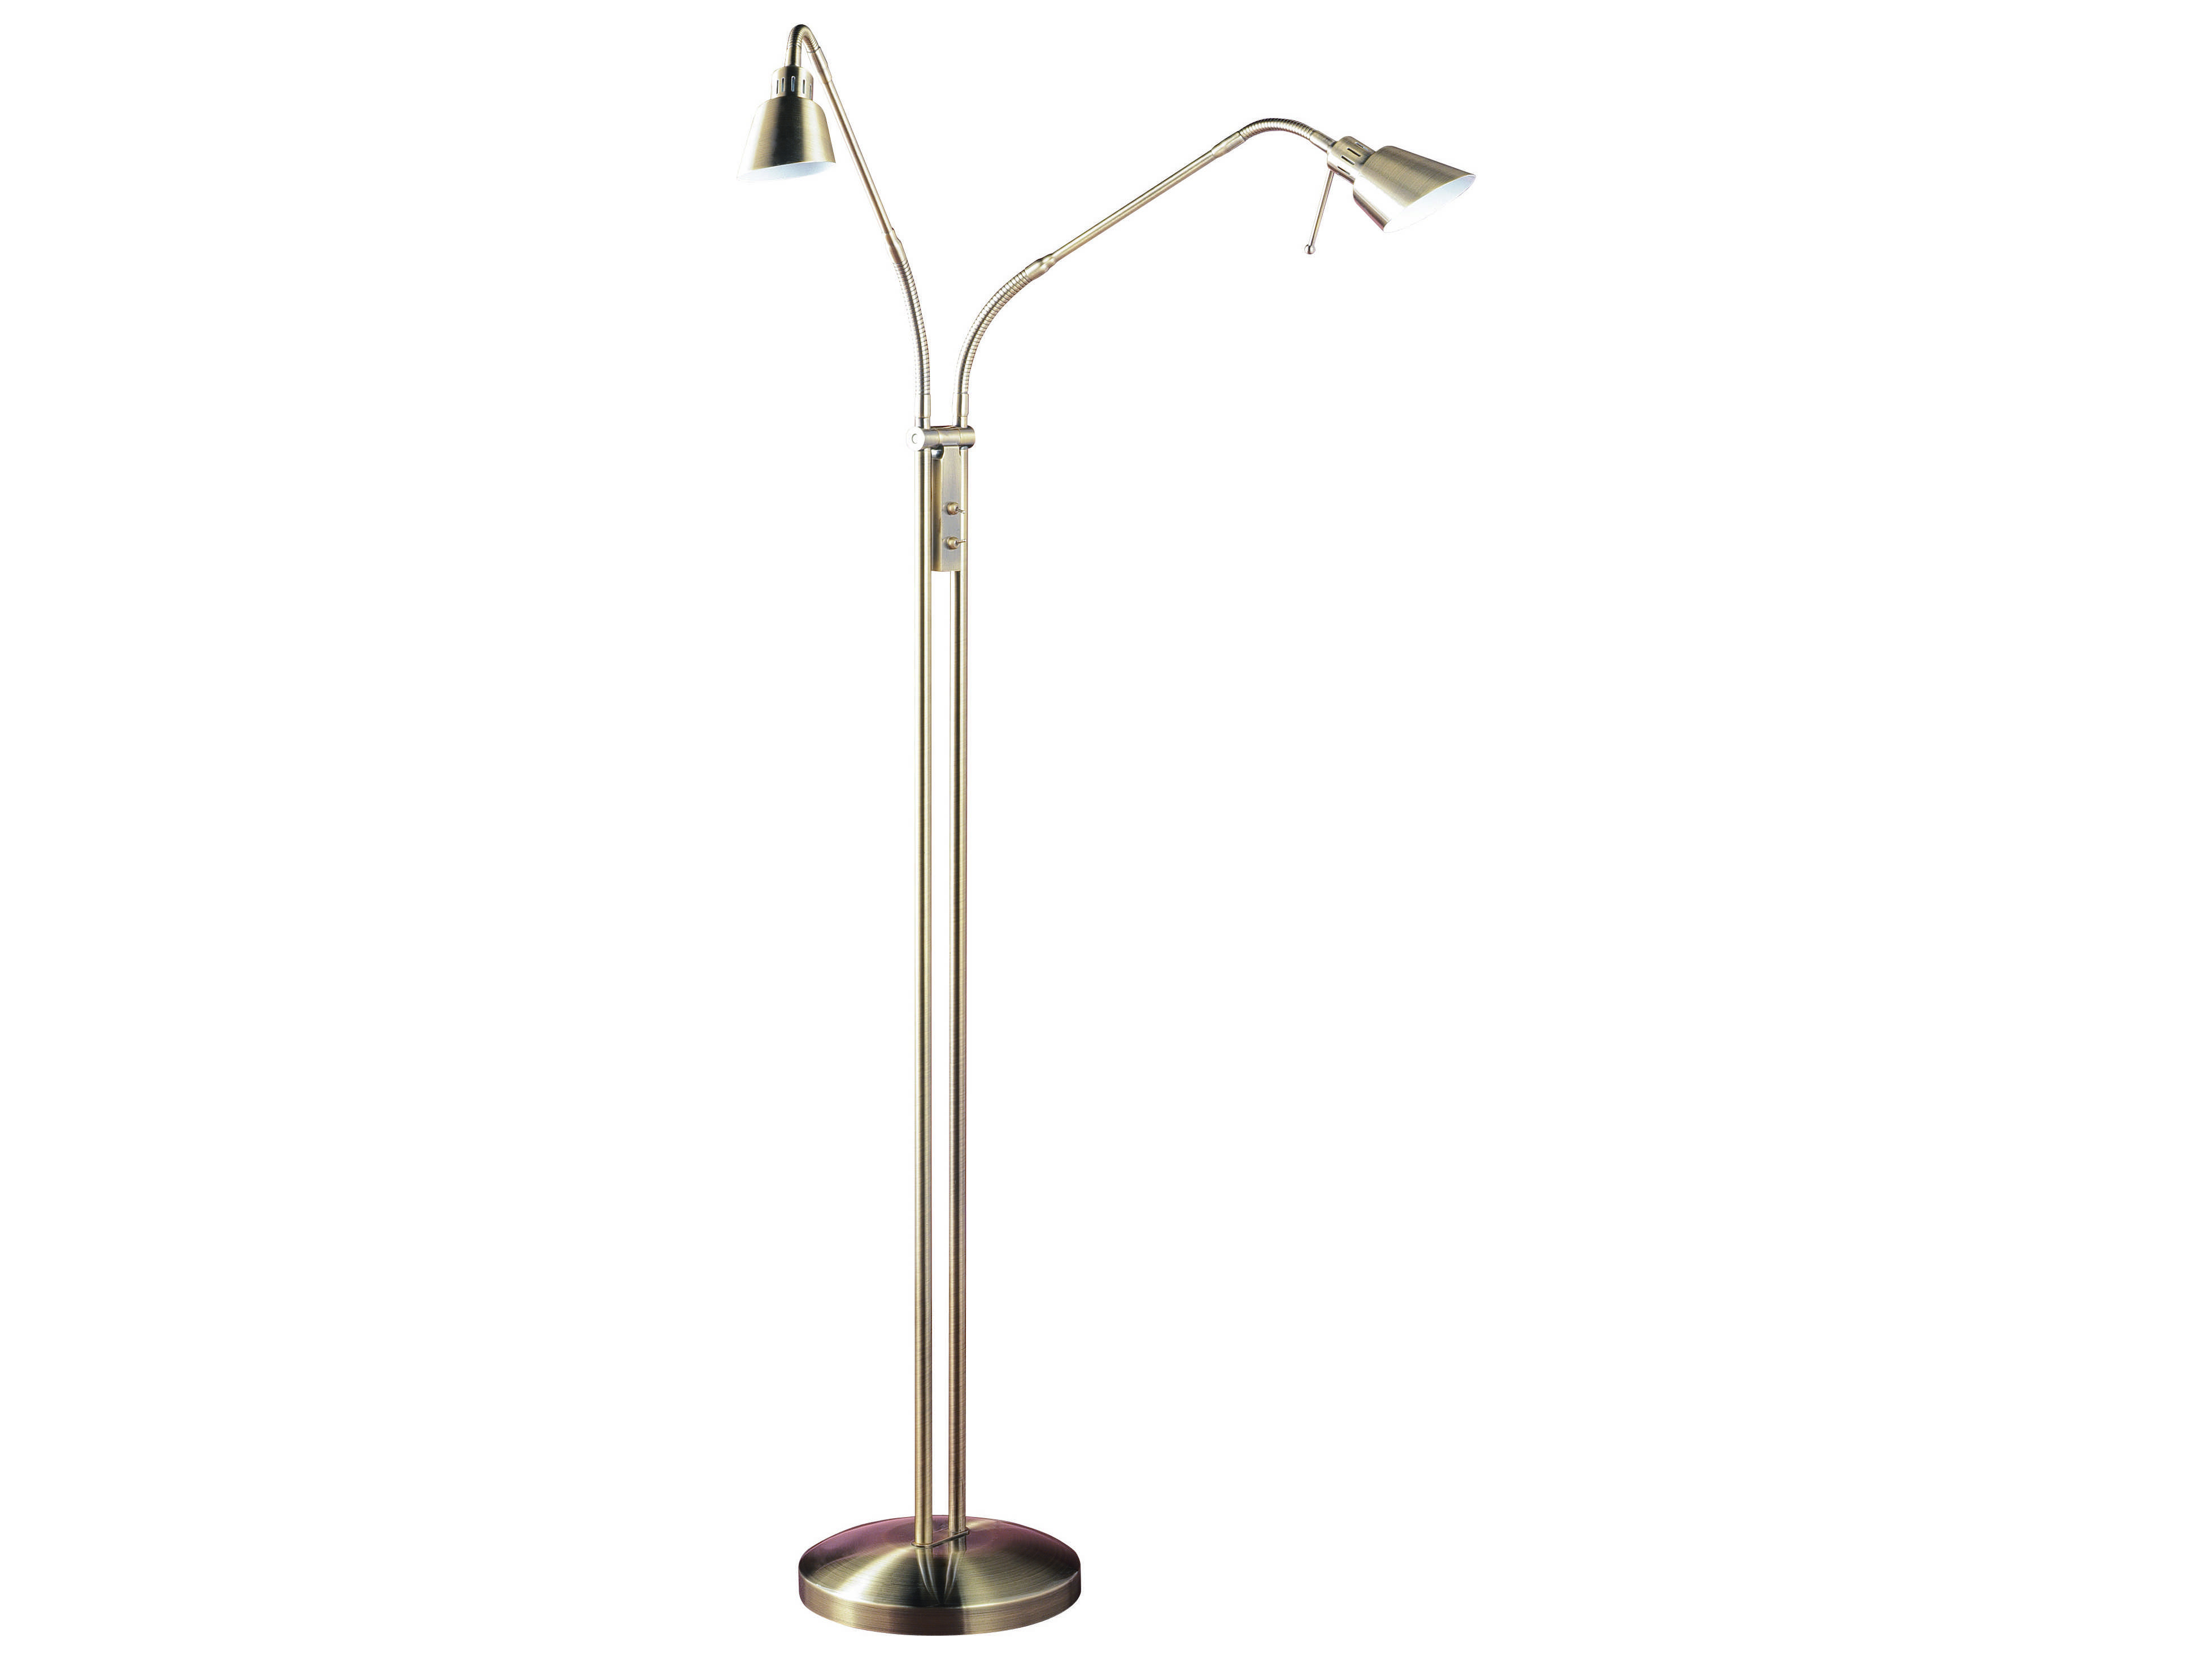 Kendal Lighting Olso Twins Antique Brass Two Light Floor Lamp throughout dimensions 3916 X 2938